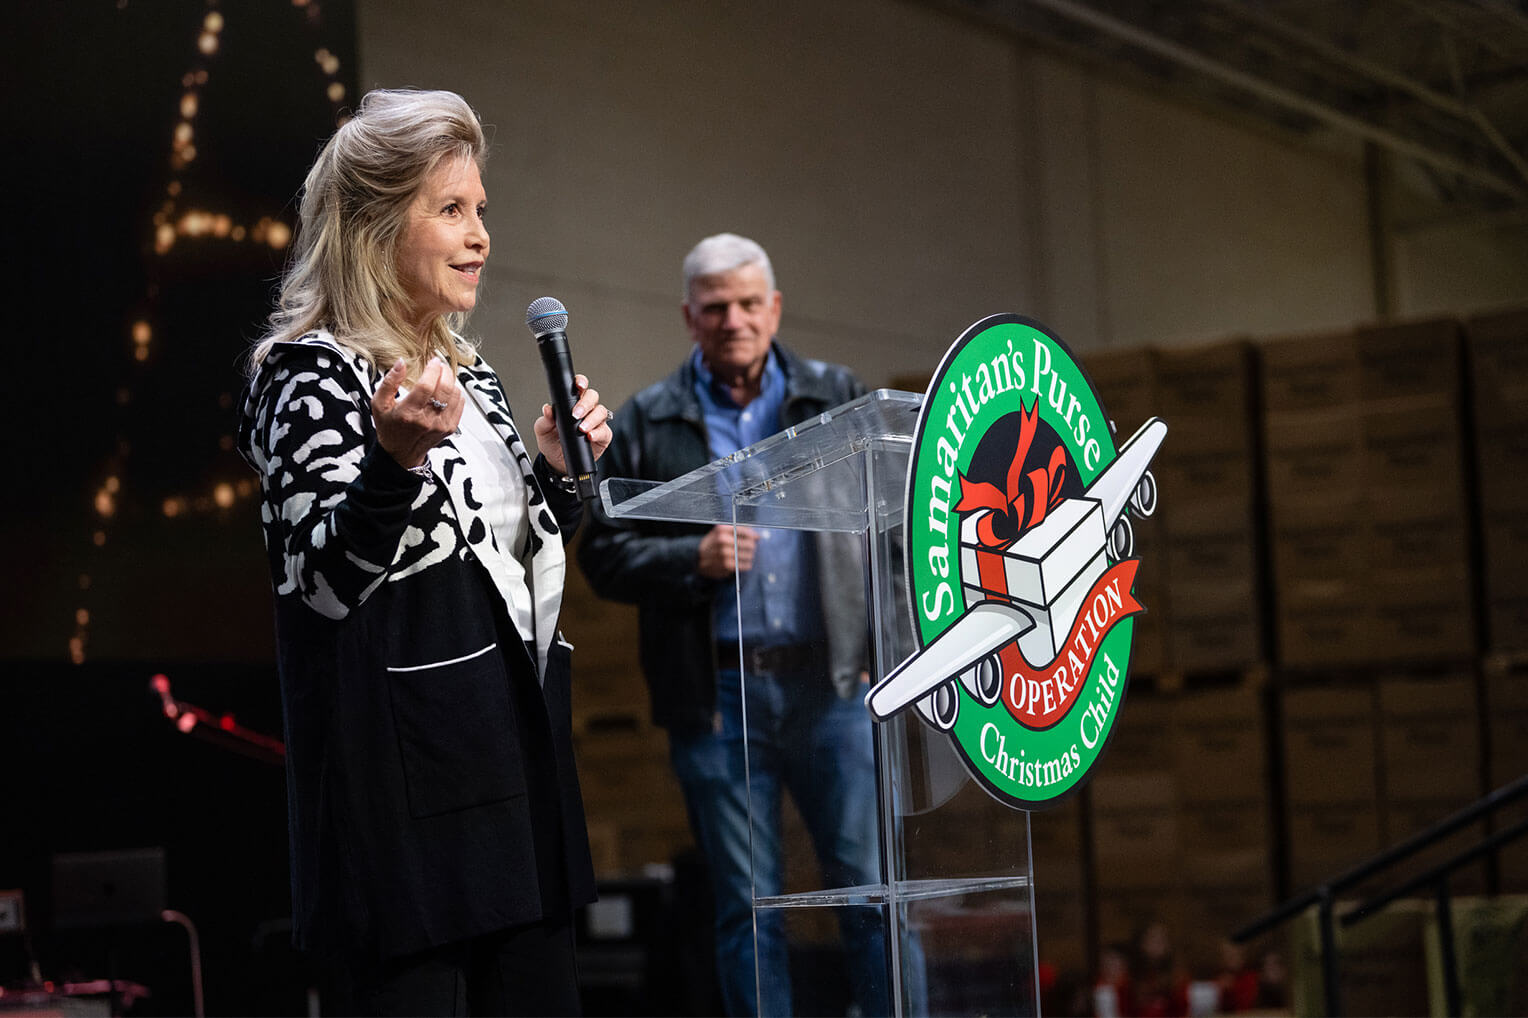 Paula Woodring packed the first shoebox gift in 1993 for Operation Christmas Child, a project of Samaritan's Purse.